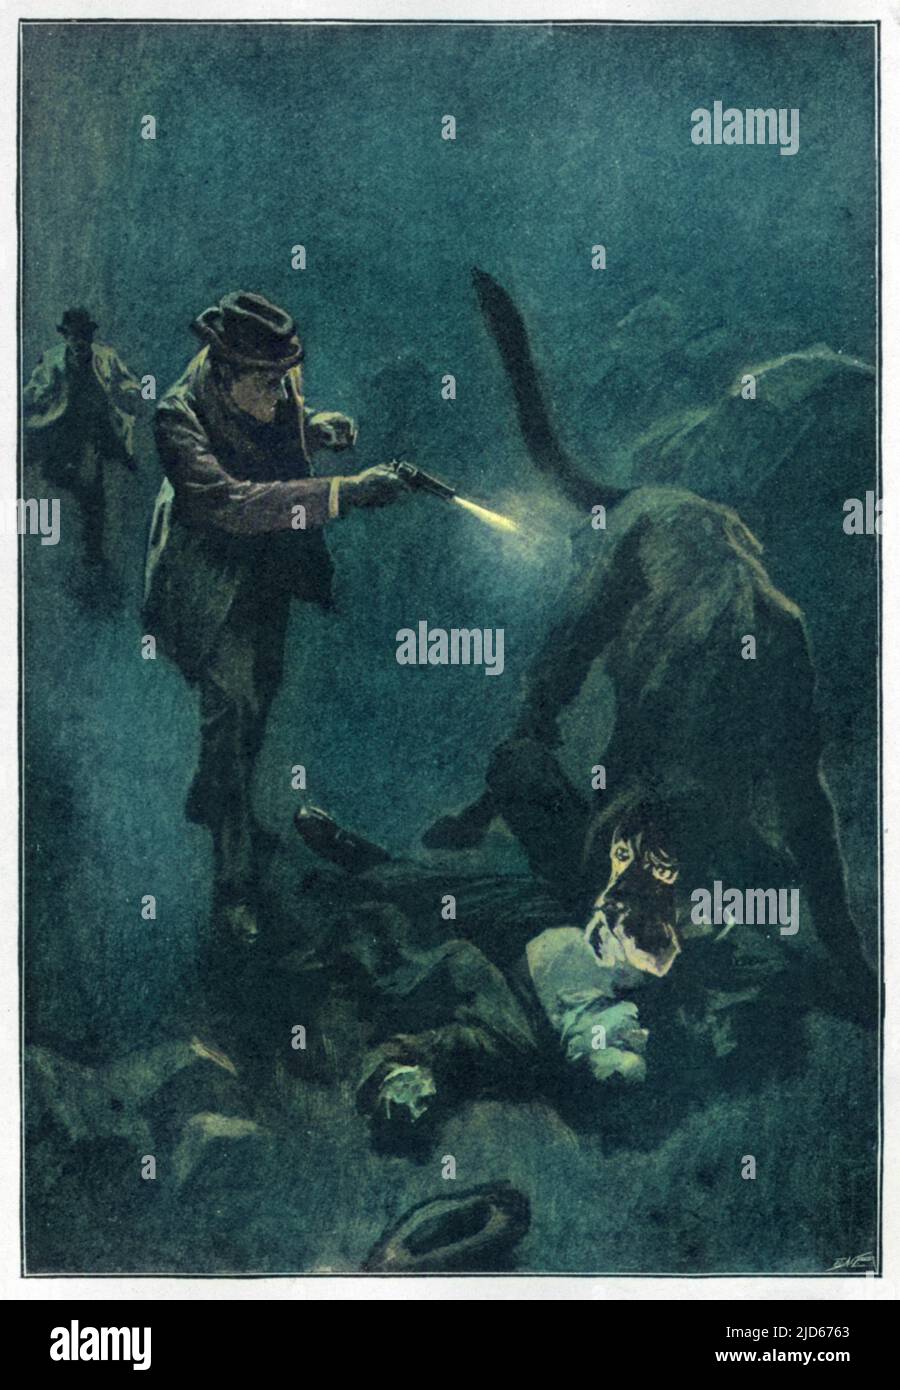 THE HOUND OF THE BASKERVILLES Holmes shoots the sinister hound: 'Holmes emptied five barrels of his revolver into the creature's flank'. Colourised version of : 10014174       Date: First published: 1901-2 Stock Photo